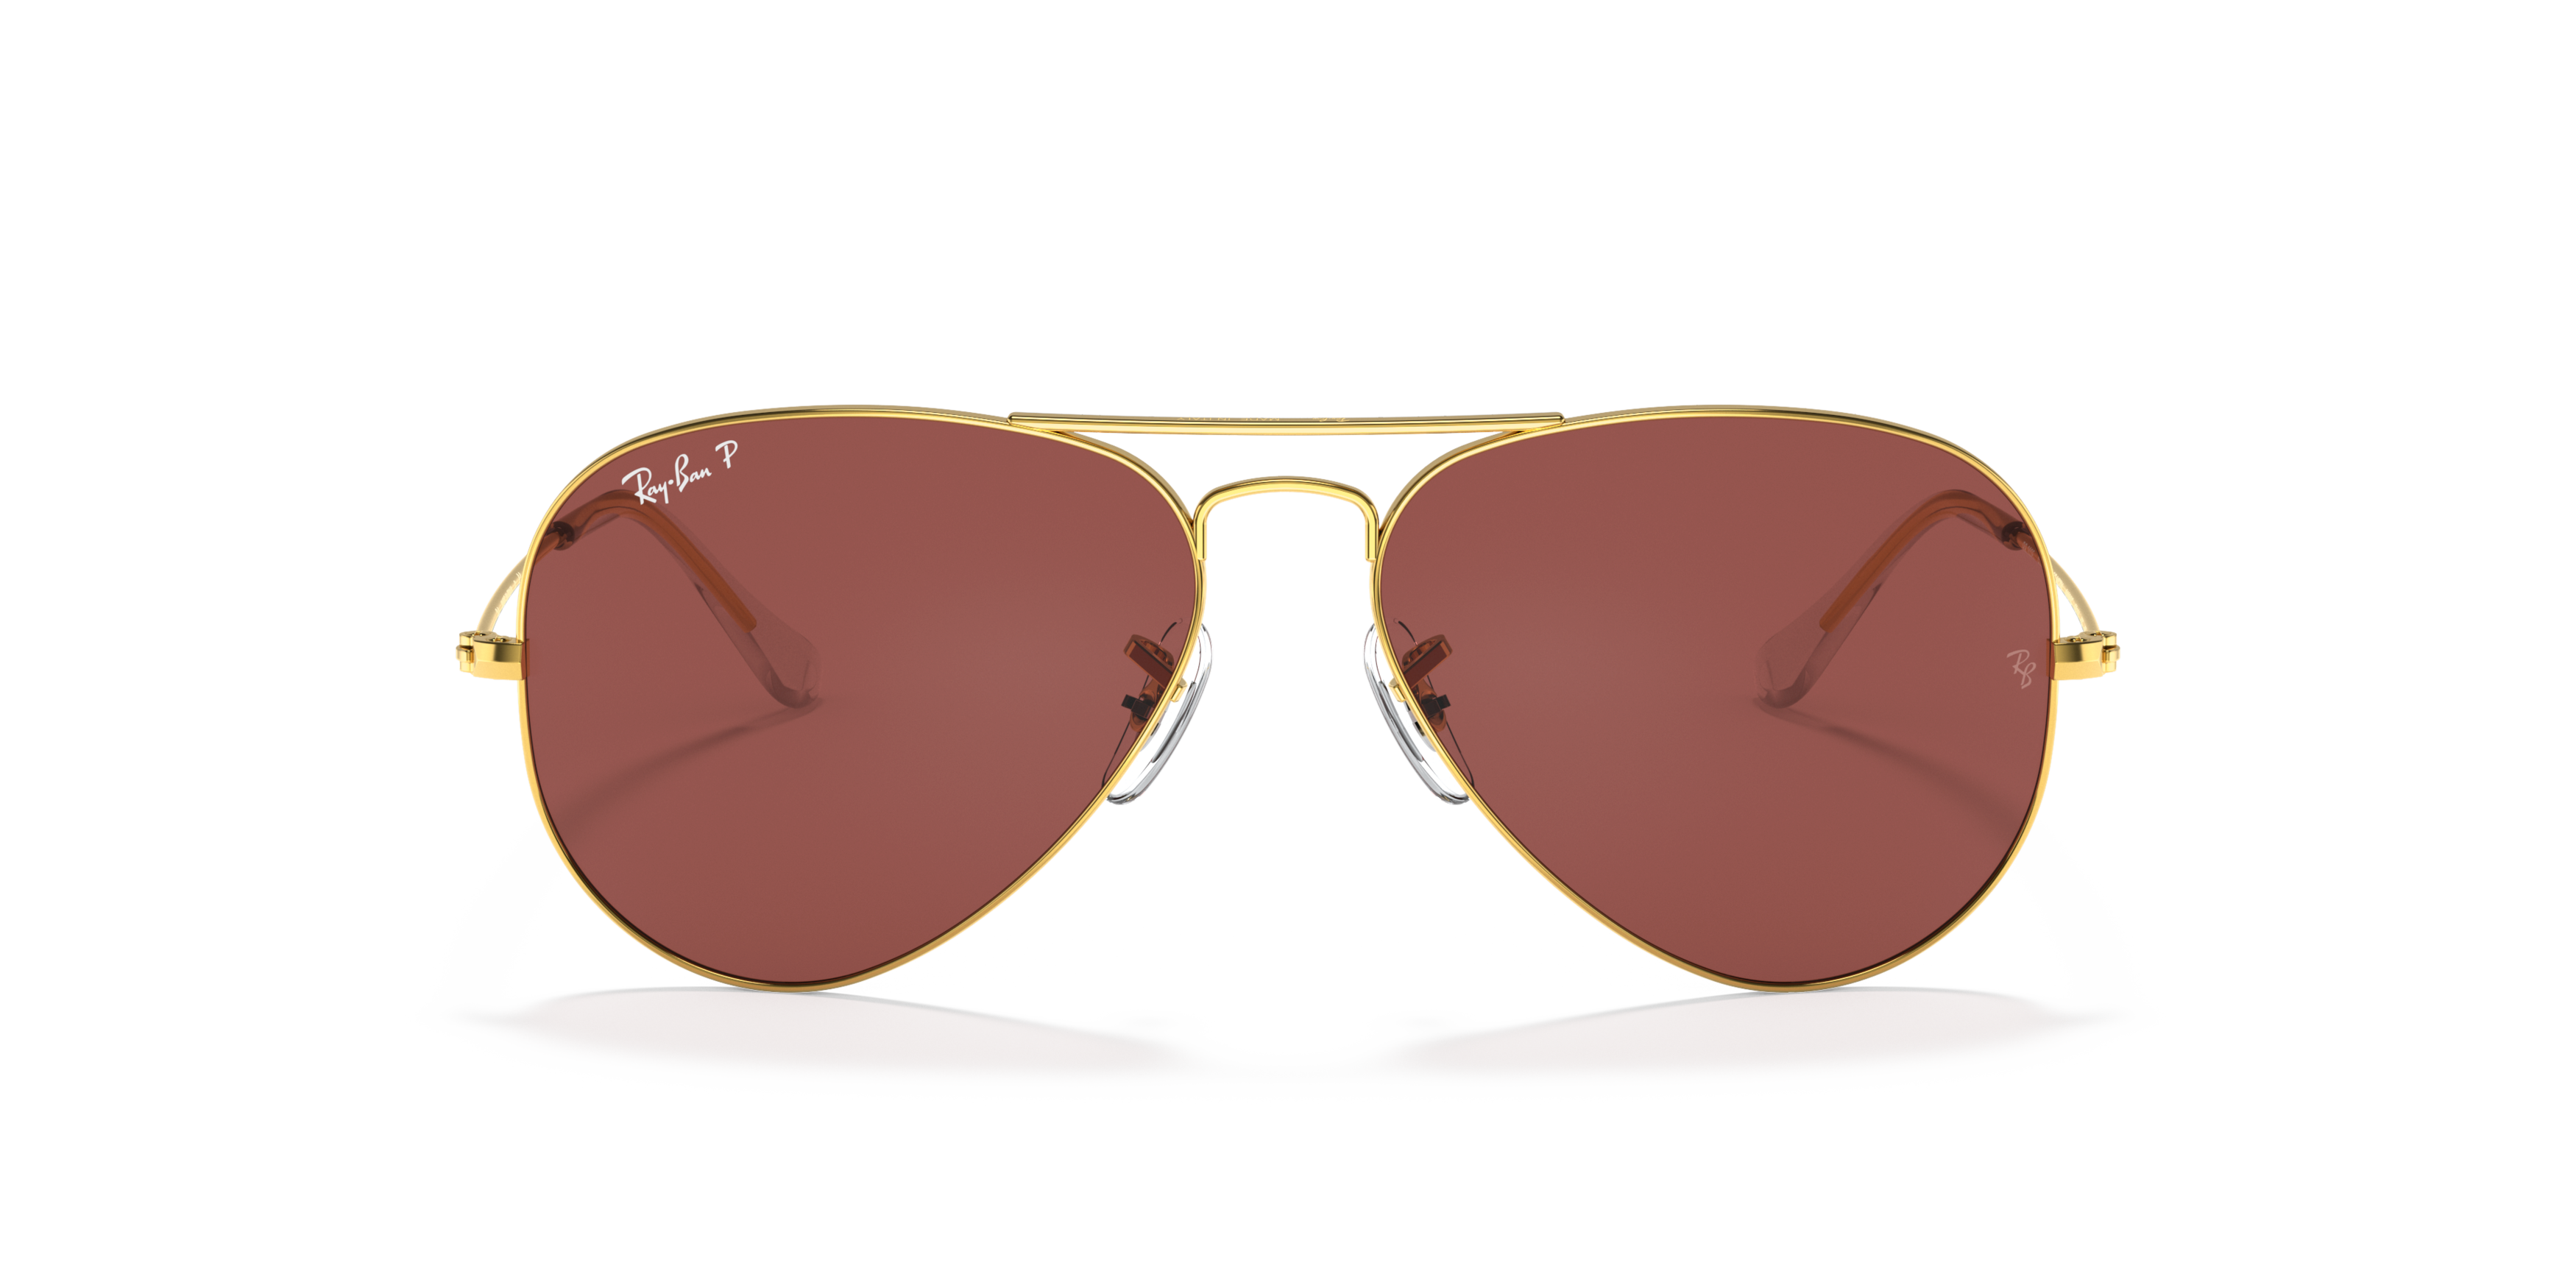 [products.image.front] Ray-Ban Aviator Classic RB3025 9196AF